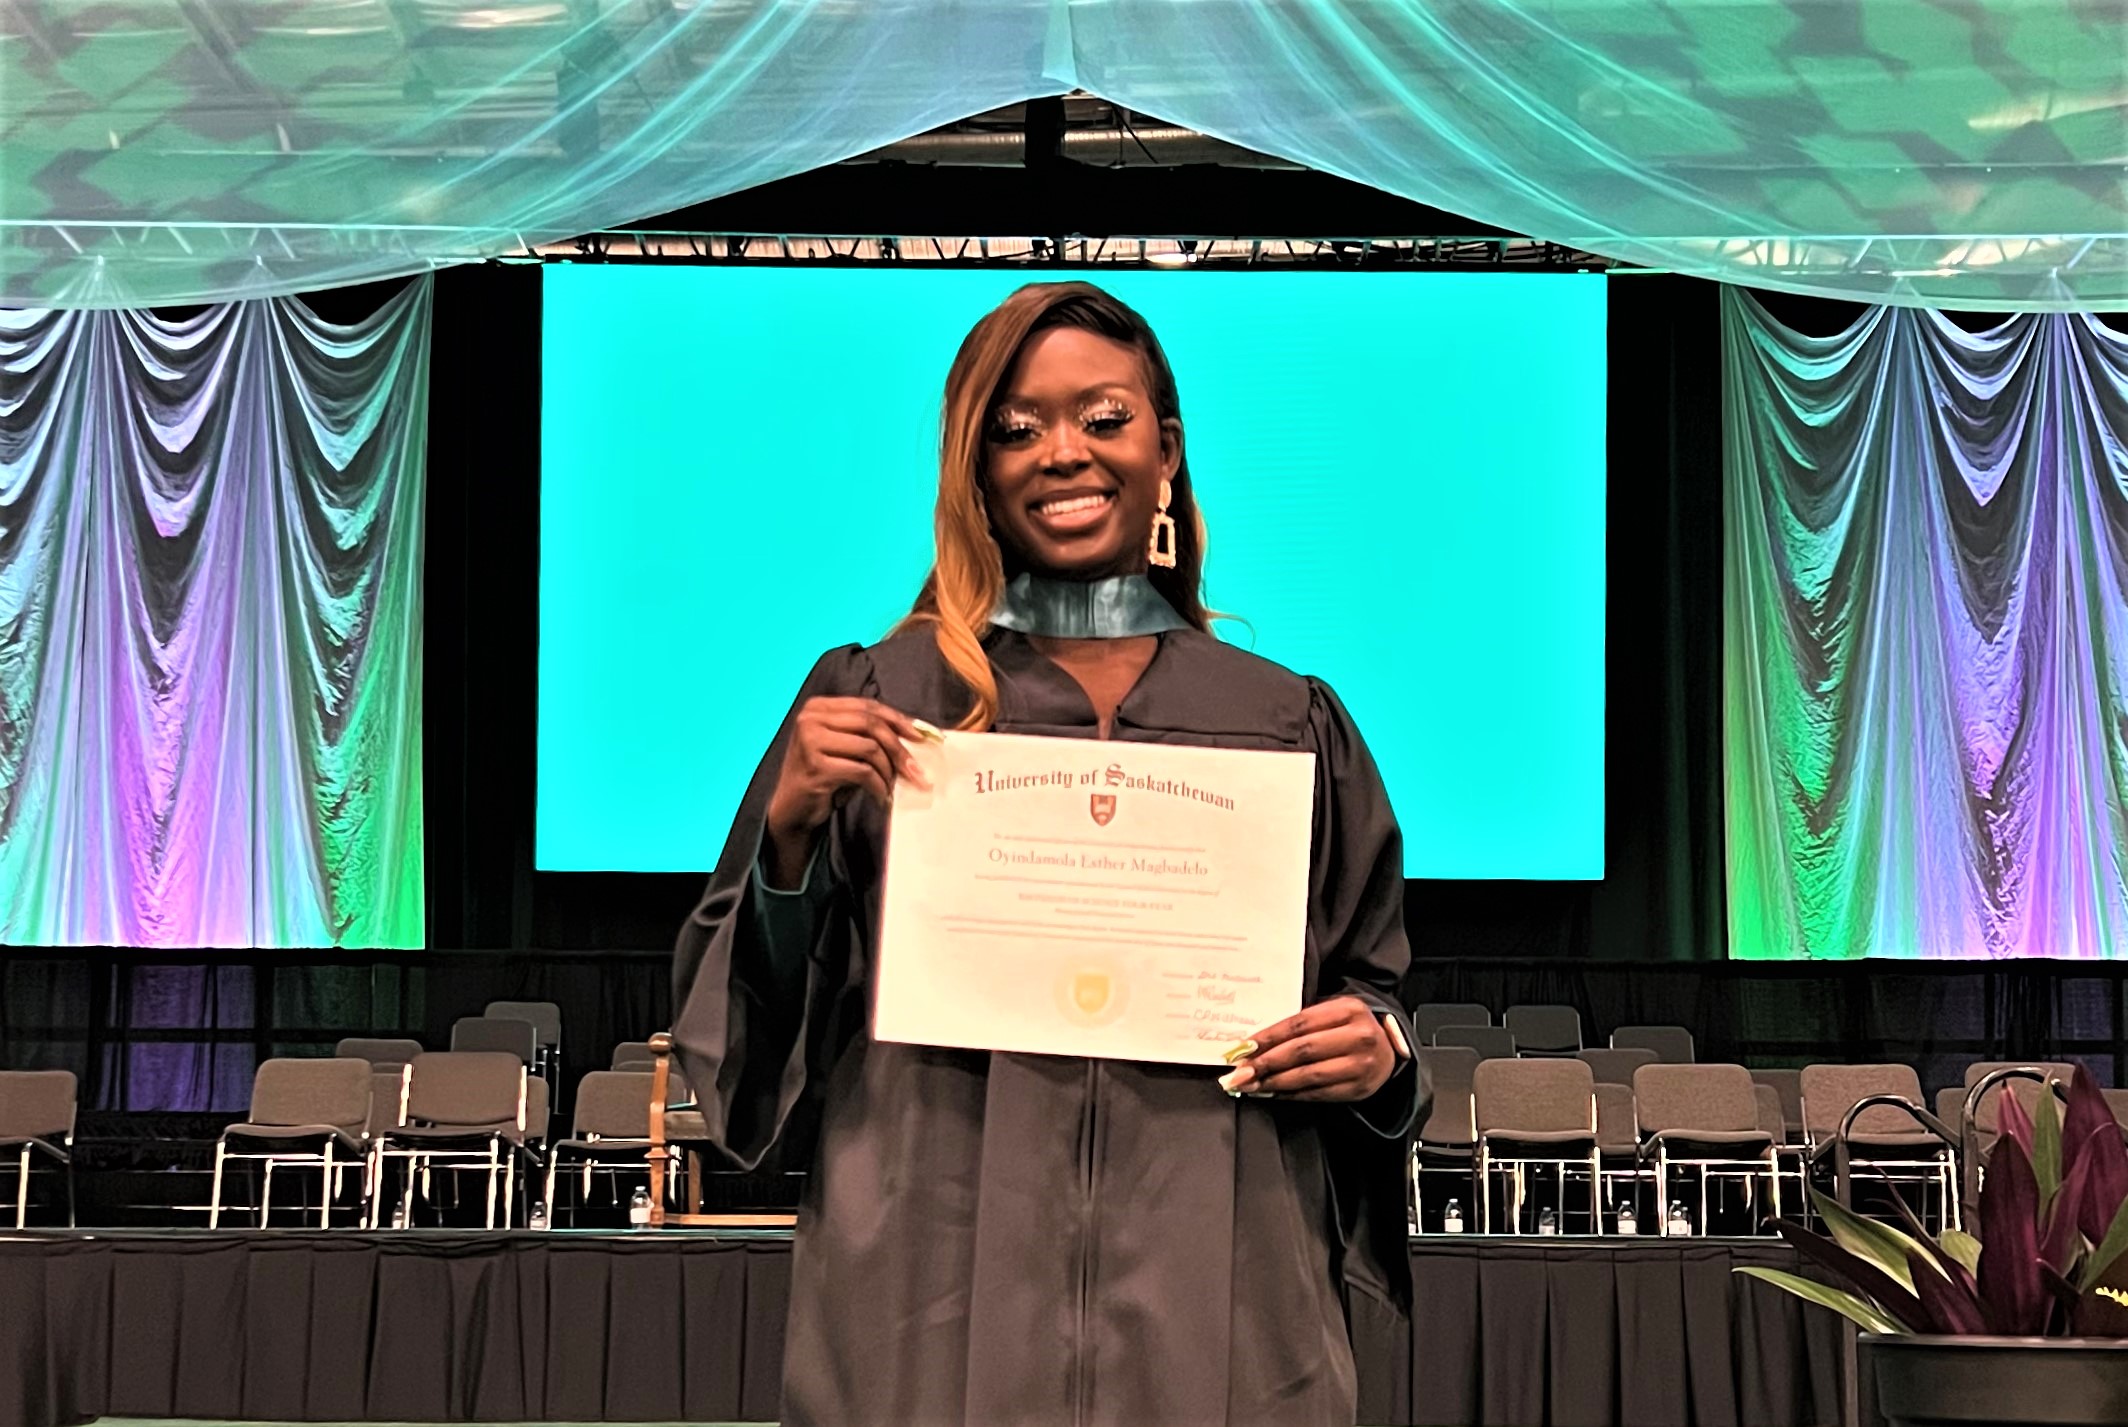 Oyin Magbadelo graduated from the University of Saskatchewan with a Bachelor of Science (BSc) in Biomedical Neuroscience with a minor in Psychology. (Submitted photo)